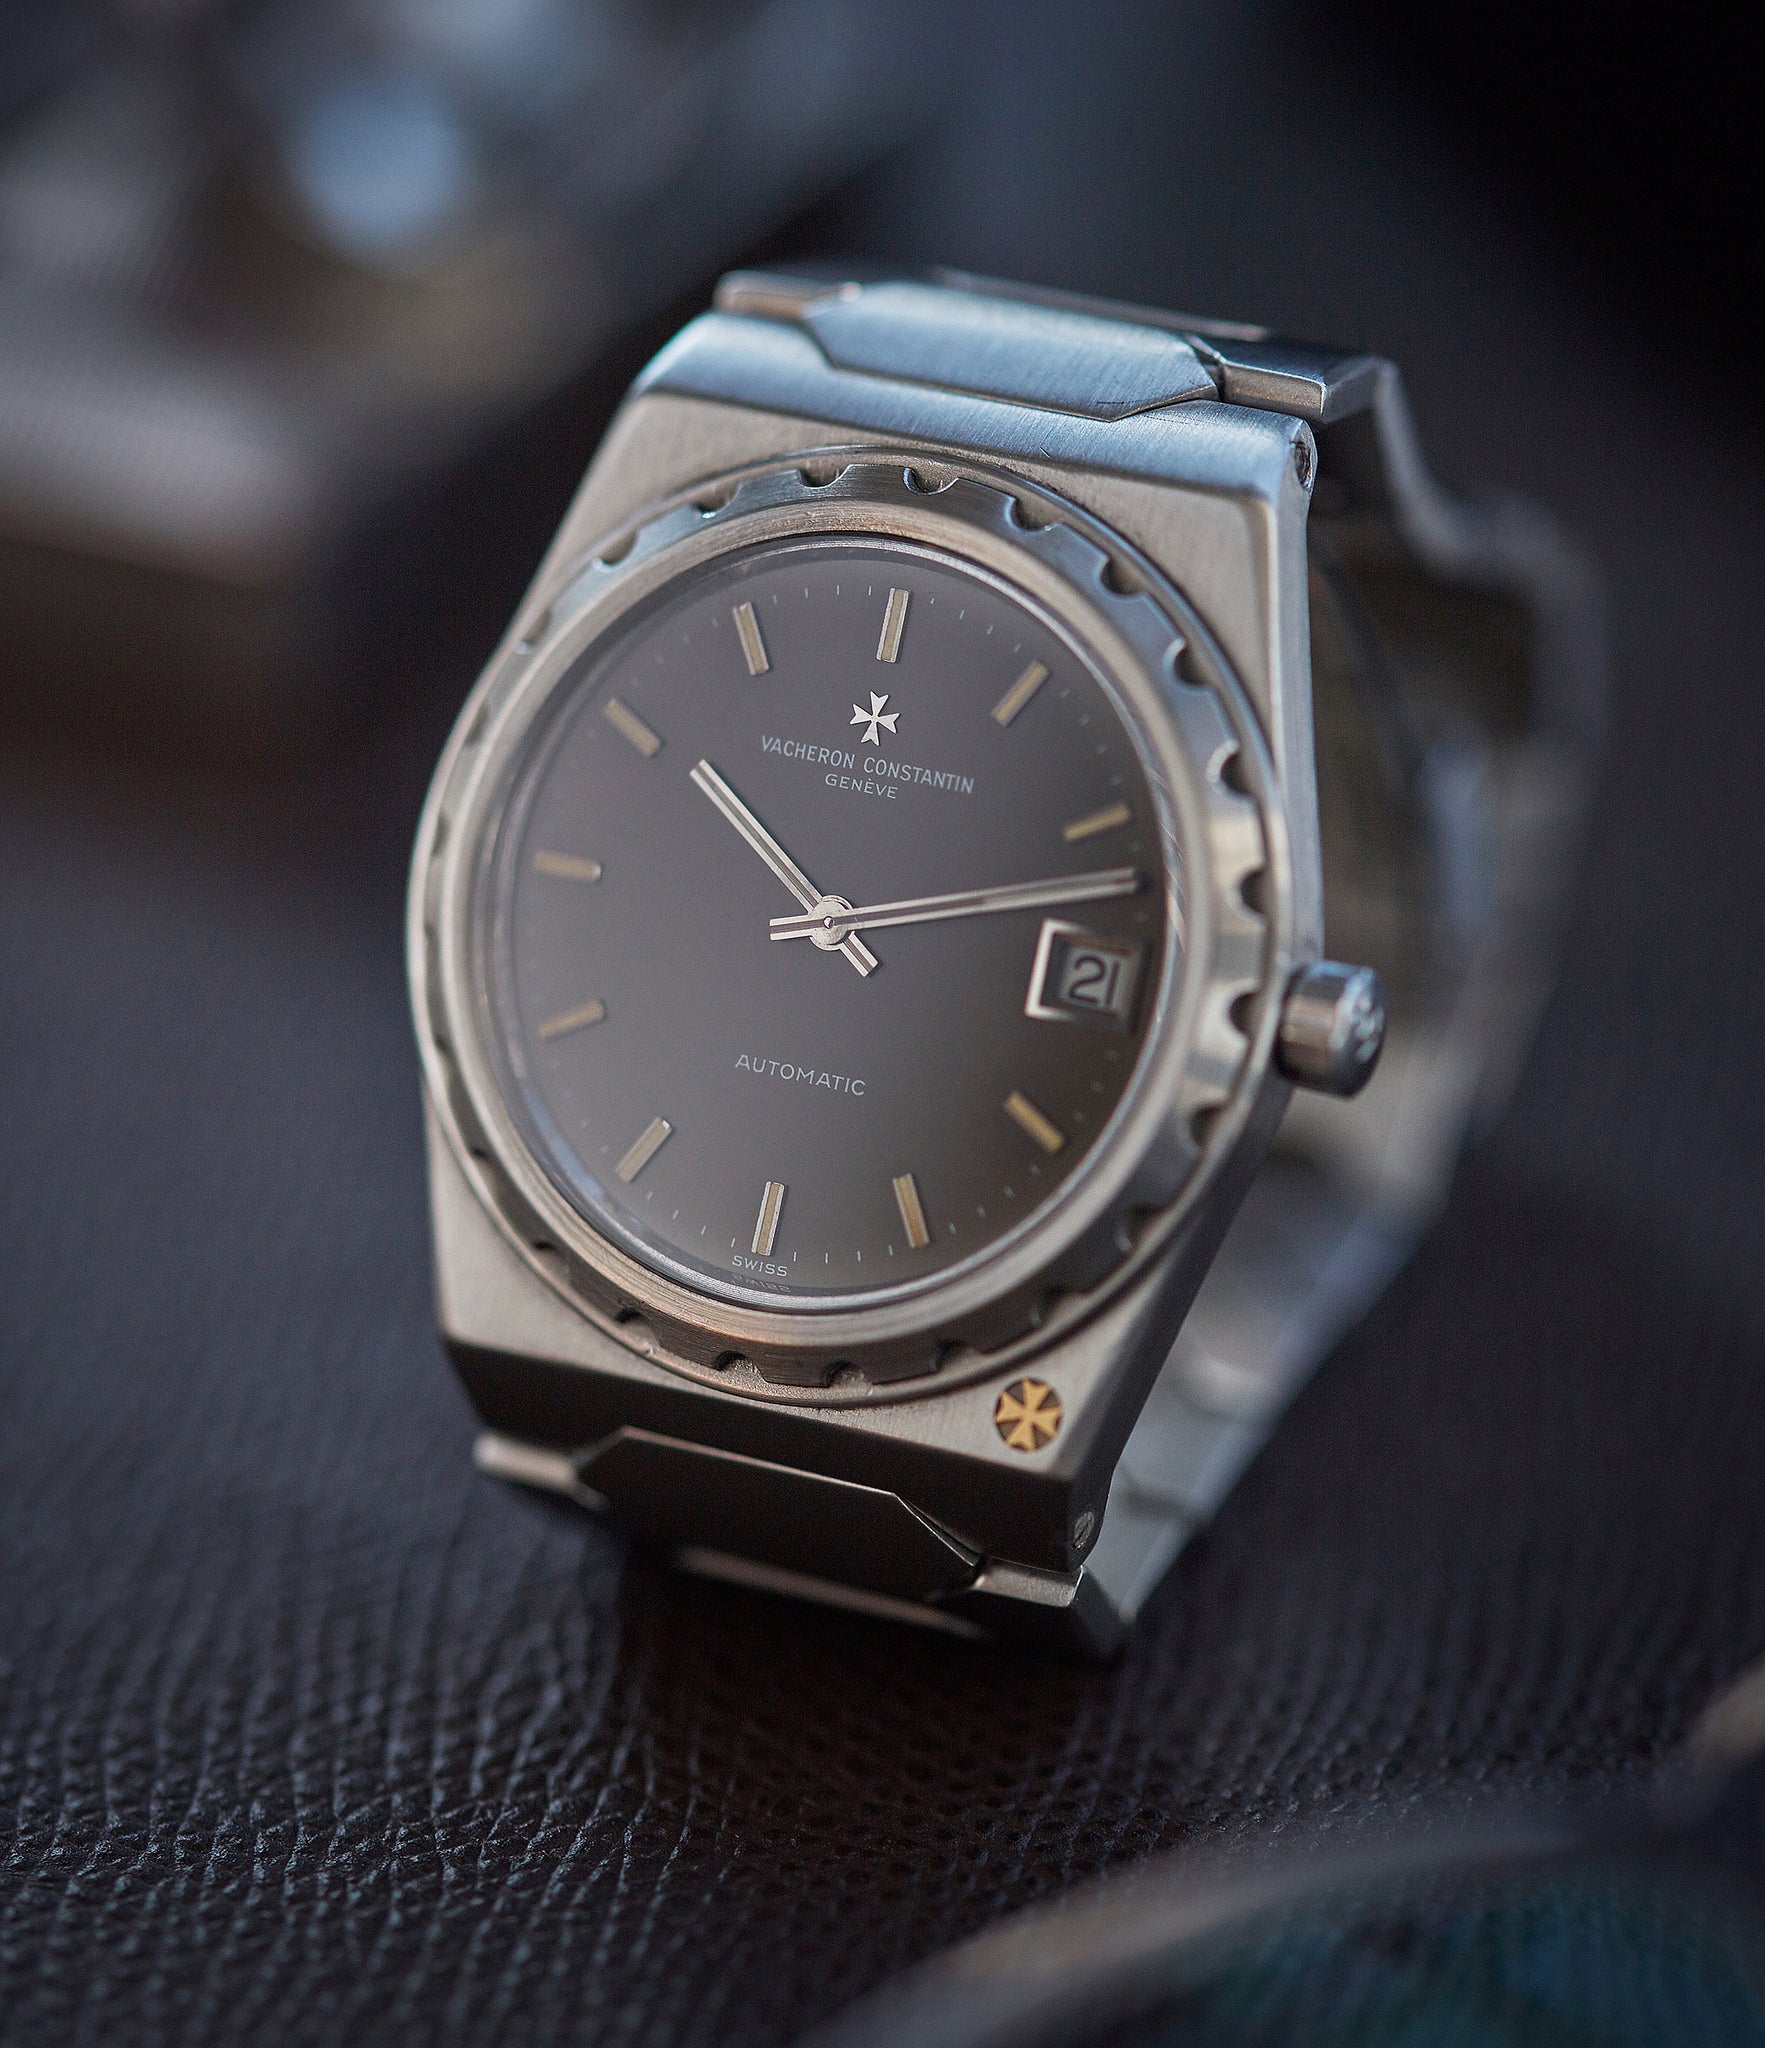 vintage Vacheron Constantin 222 steel grey dial sport watch for sale online at A Collected Man London UK specialist of rare watches